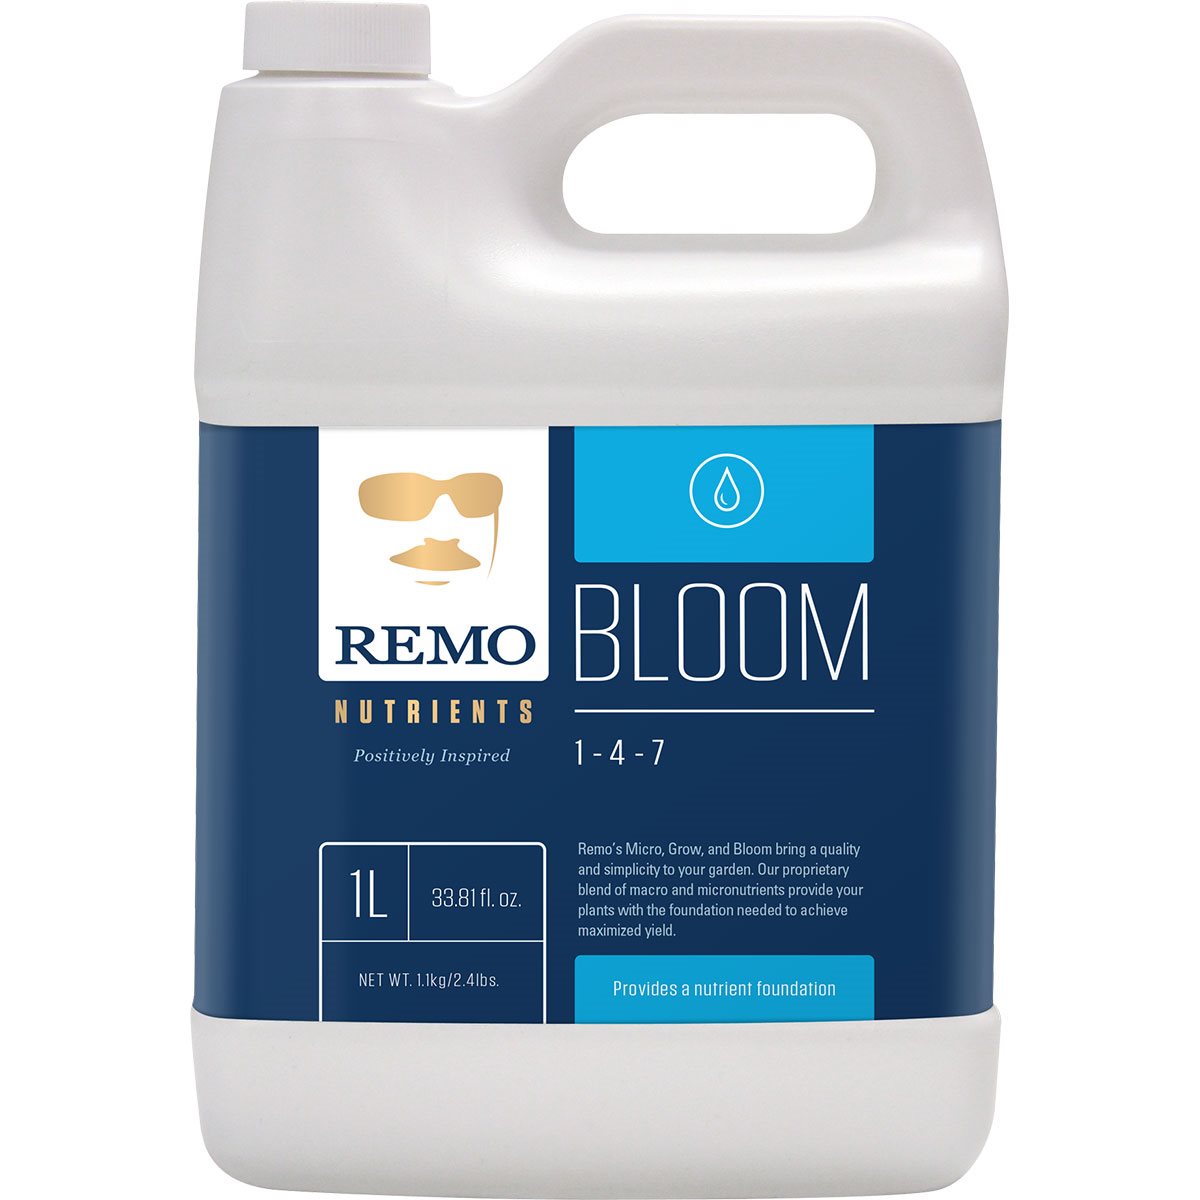 Product Image:Remo Nutriments Bloom (1-4-7)